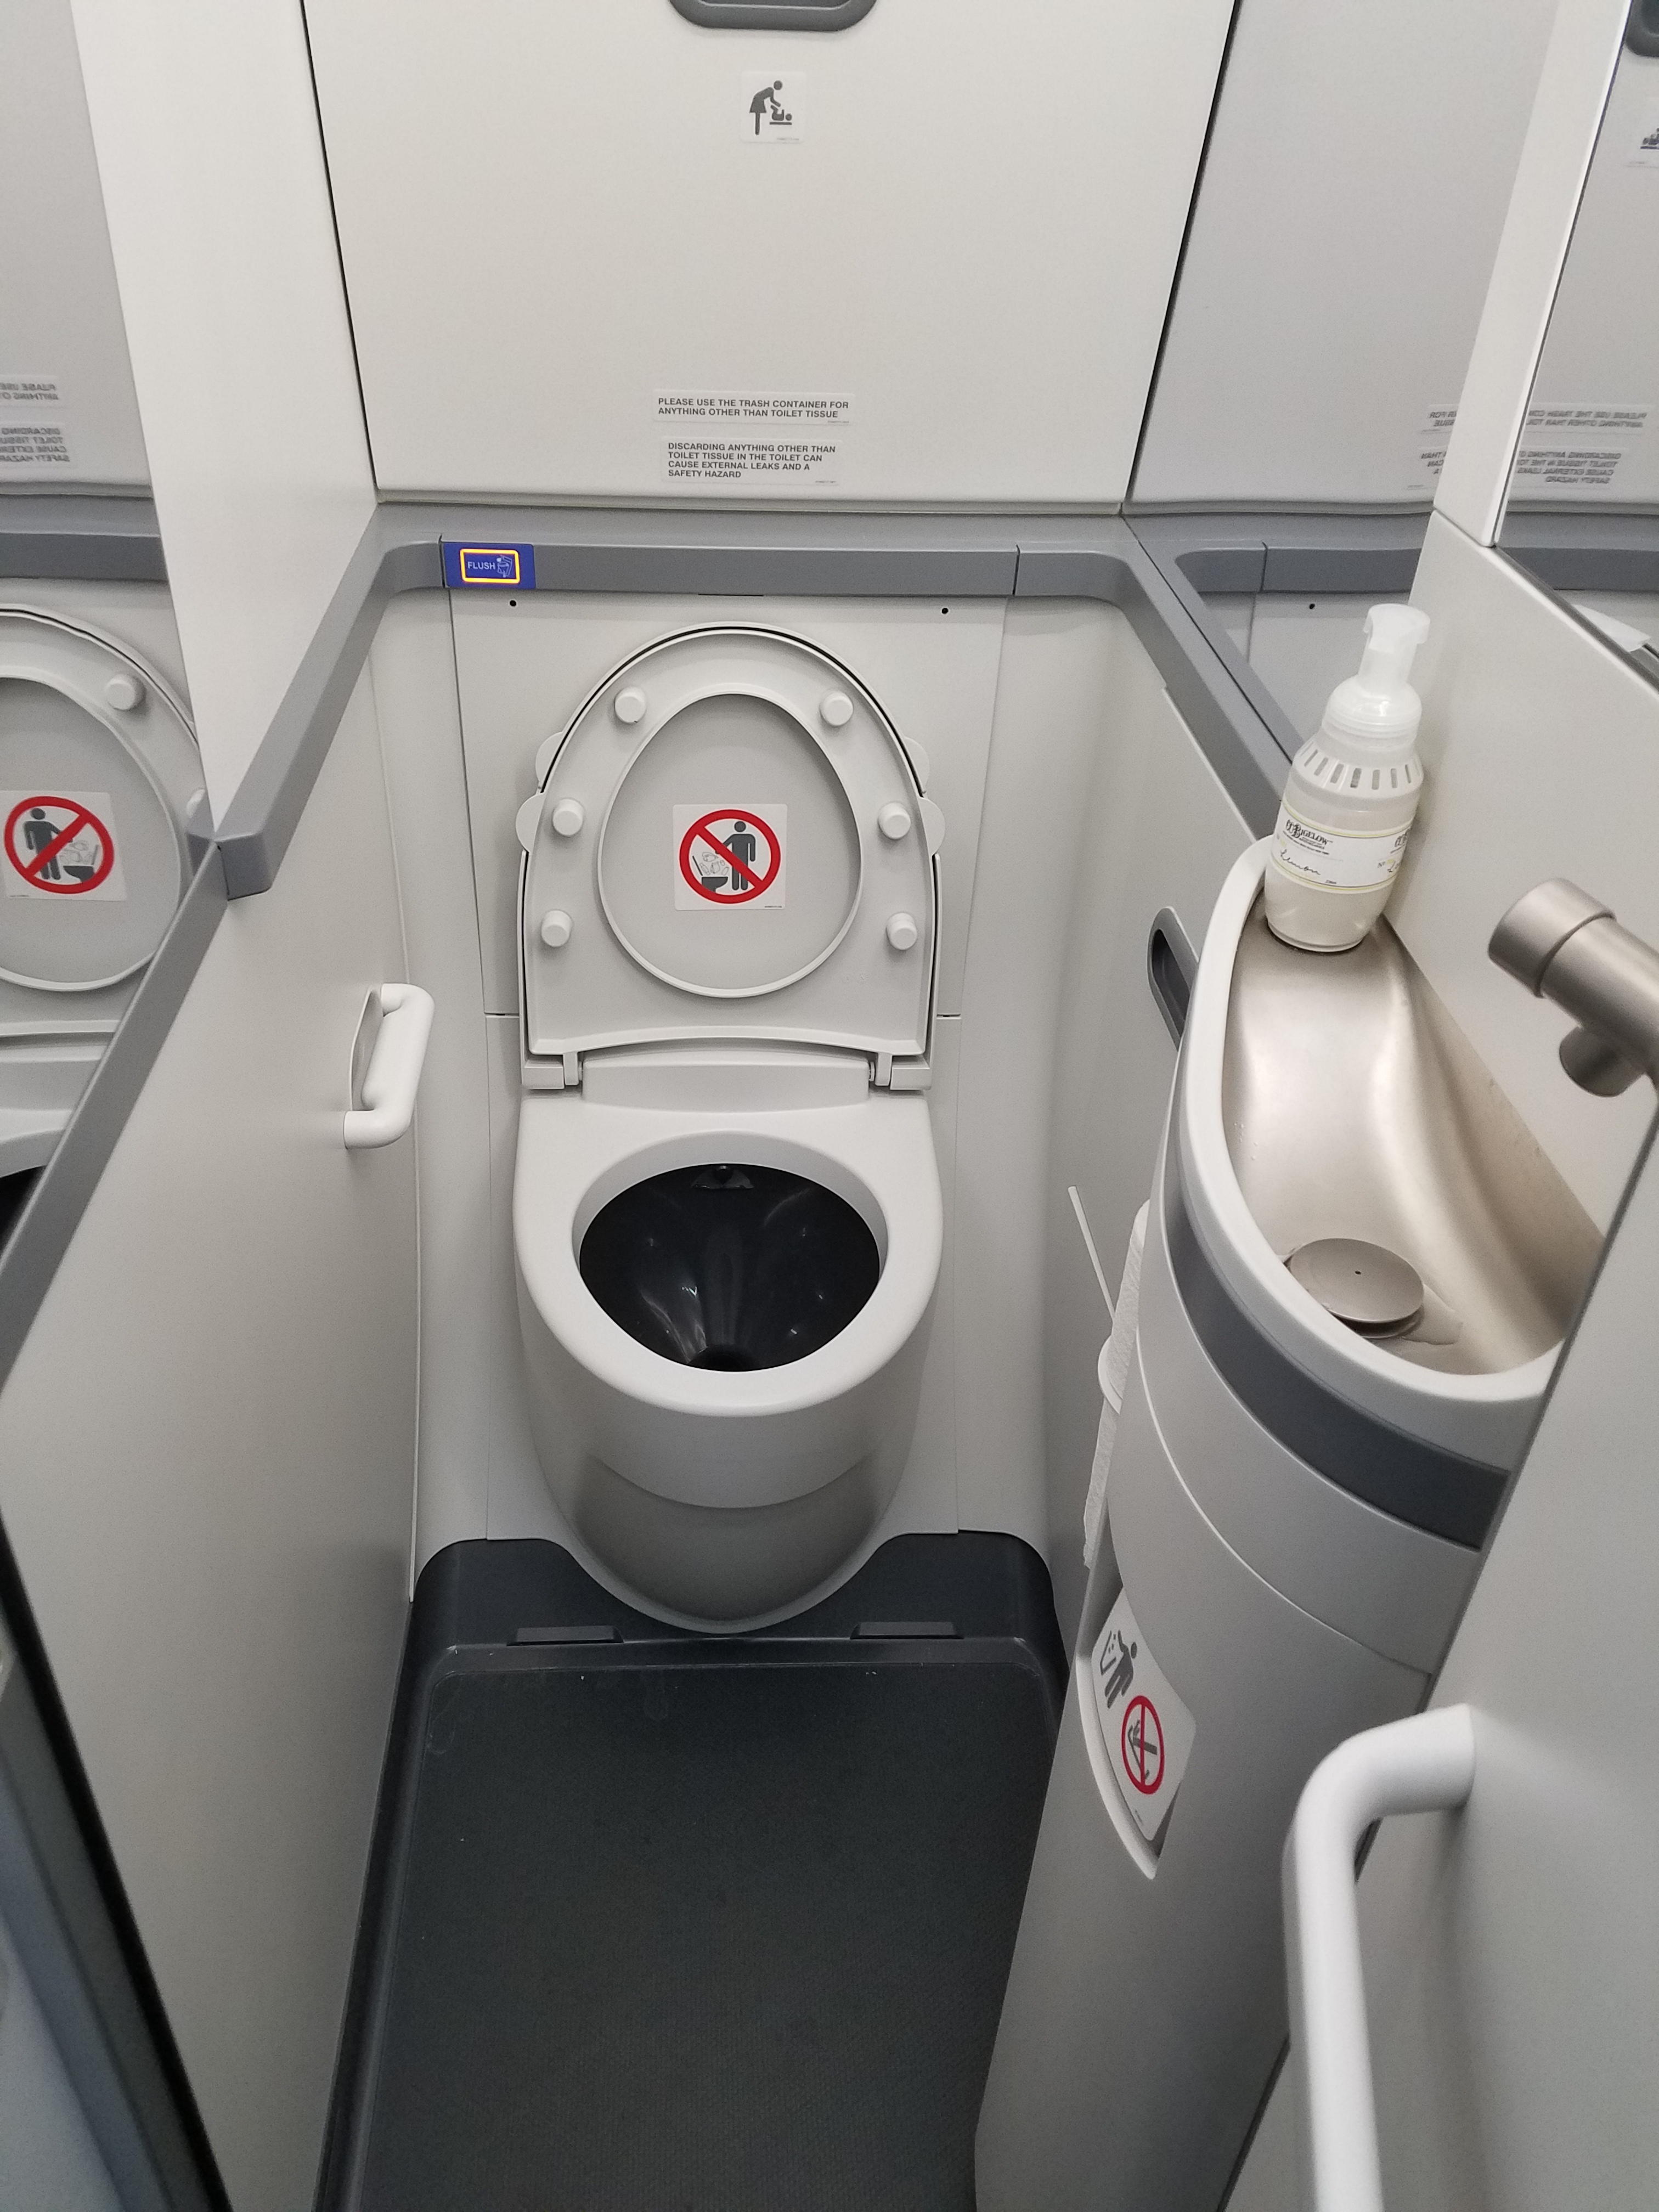 American S Ceo Says His Airline S New Miniature Lavatory Is